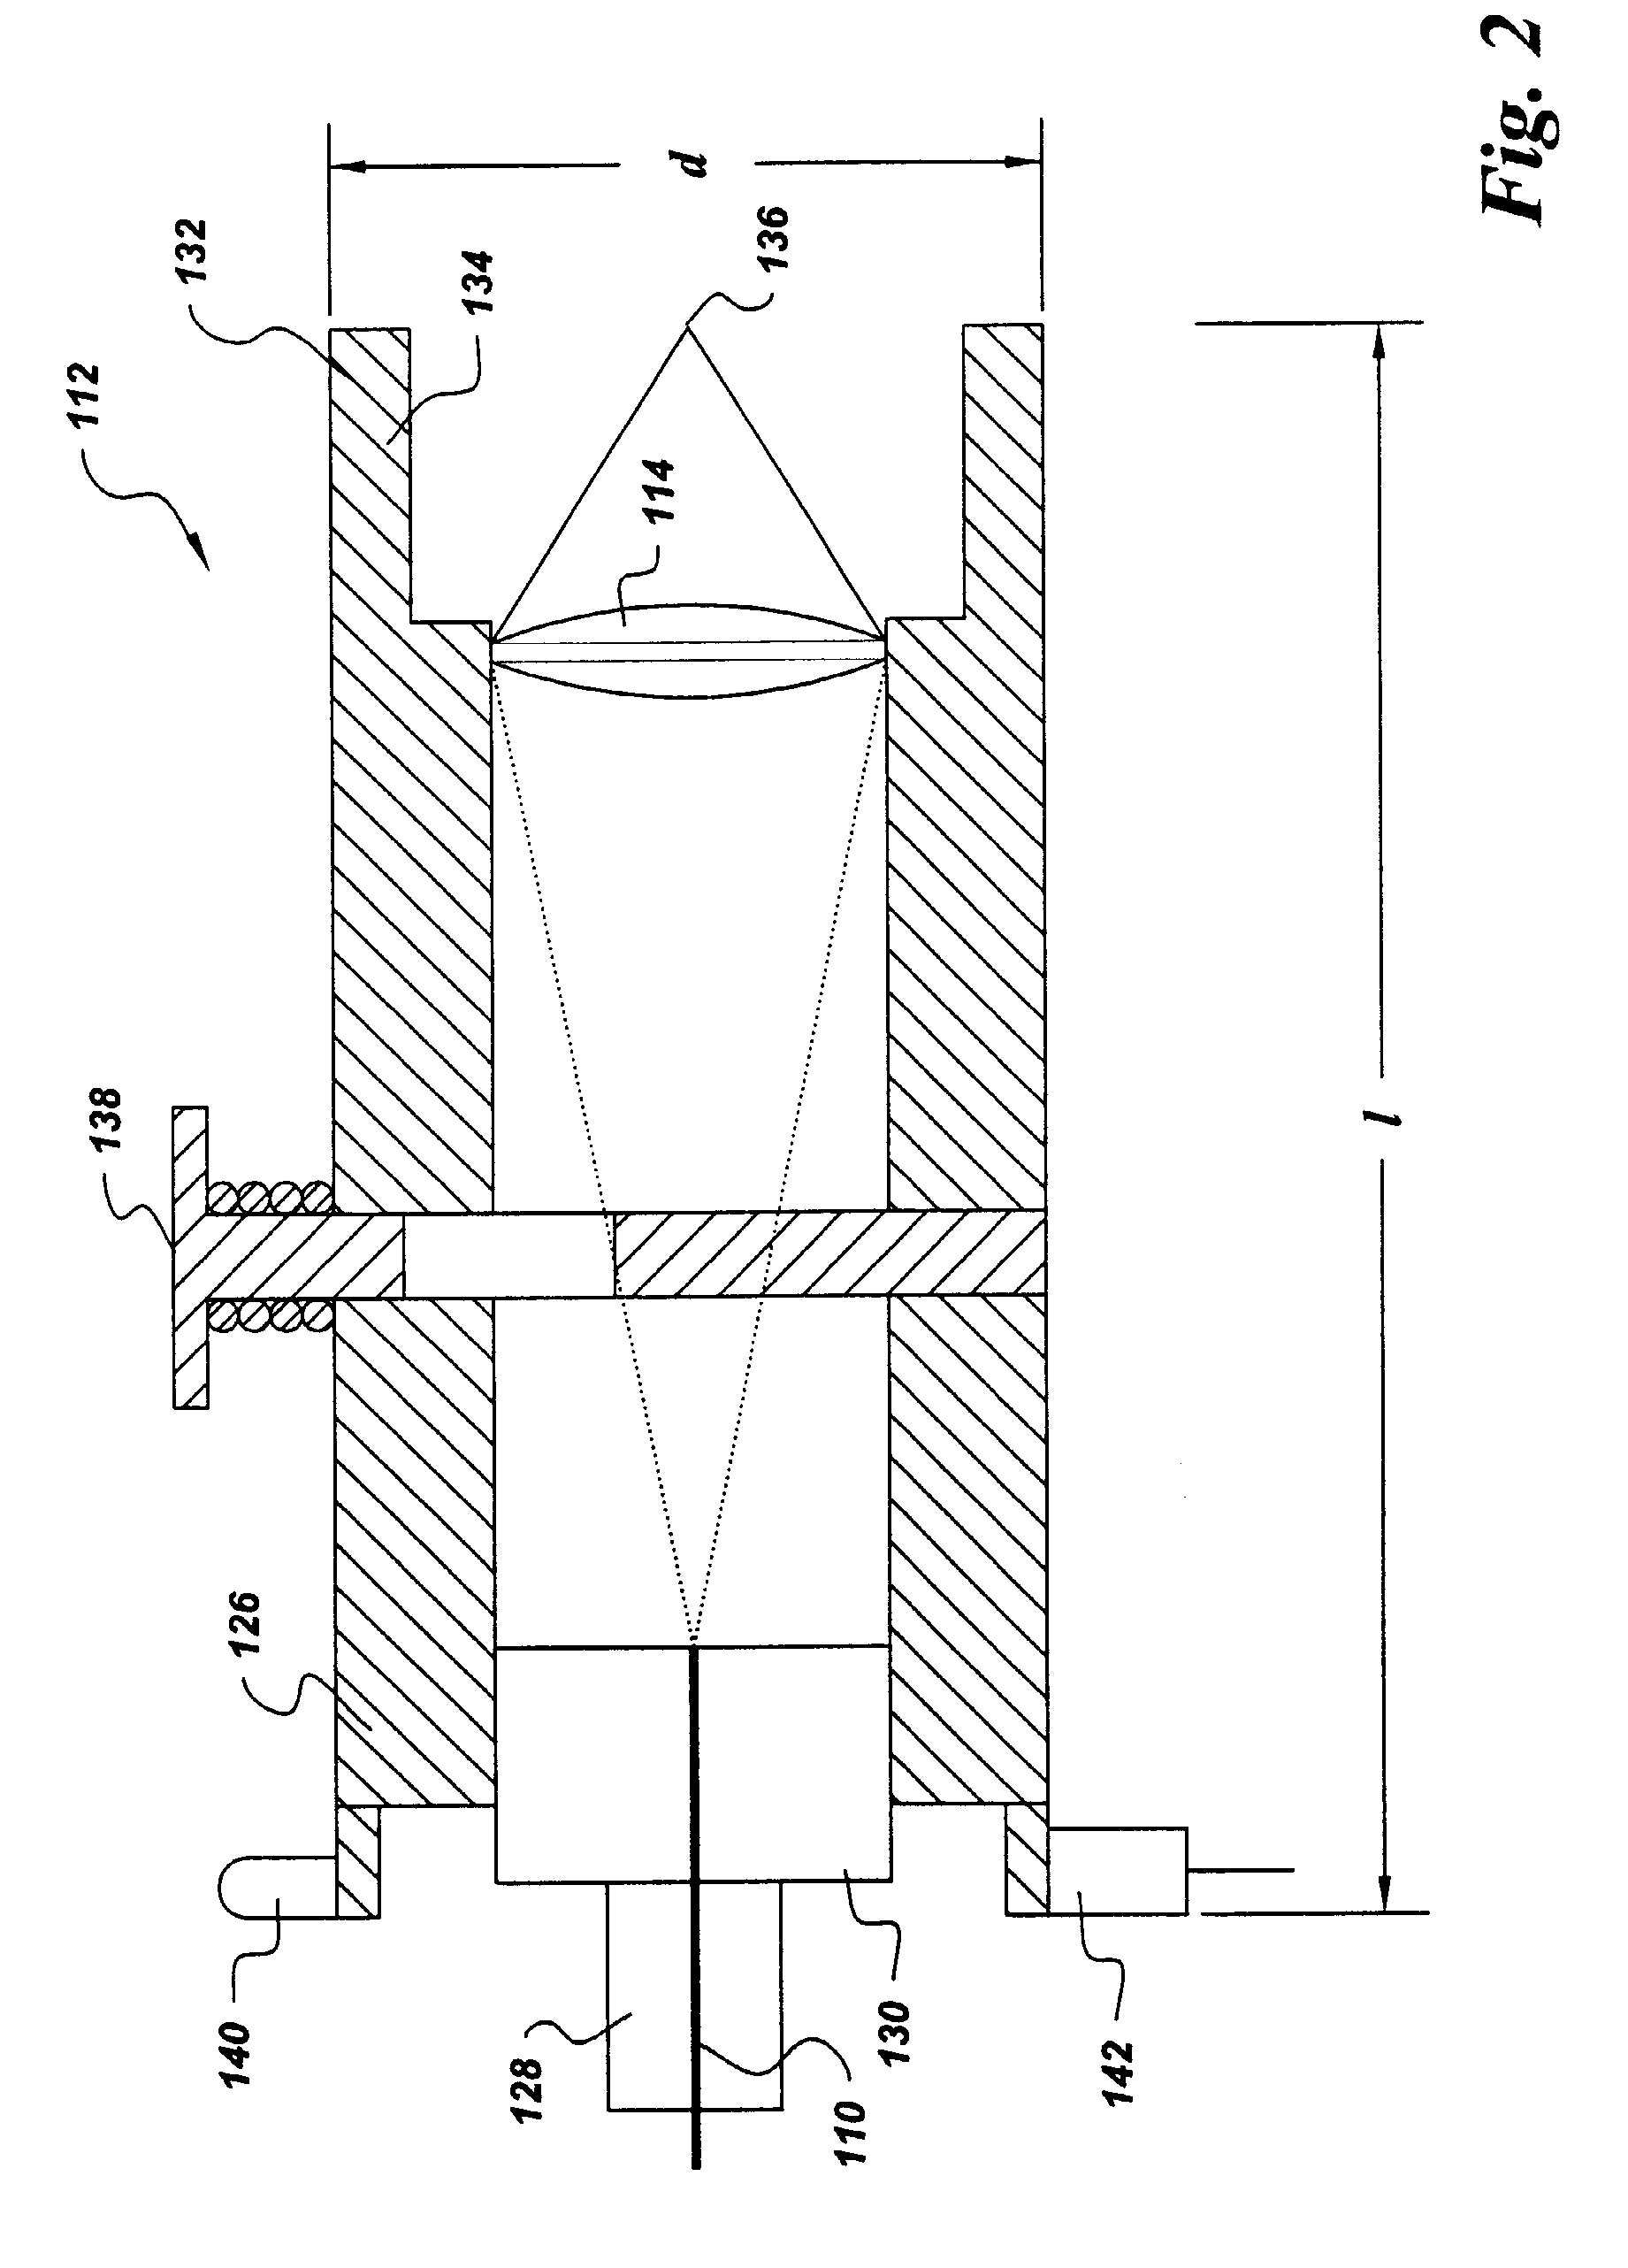 Fiber optical apparatus and system for in situ laser plasma spectroscopy